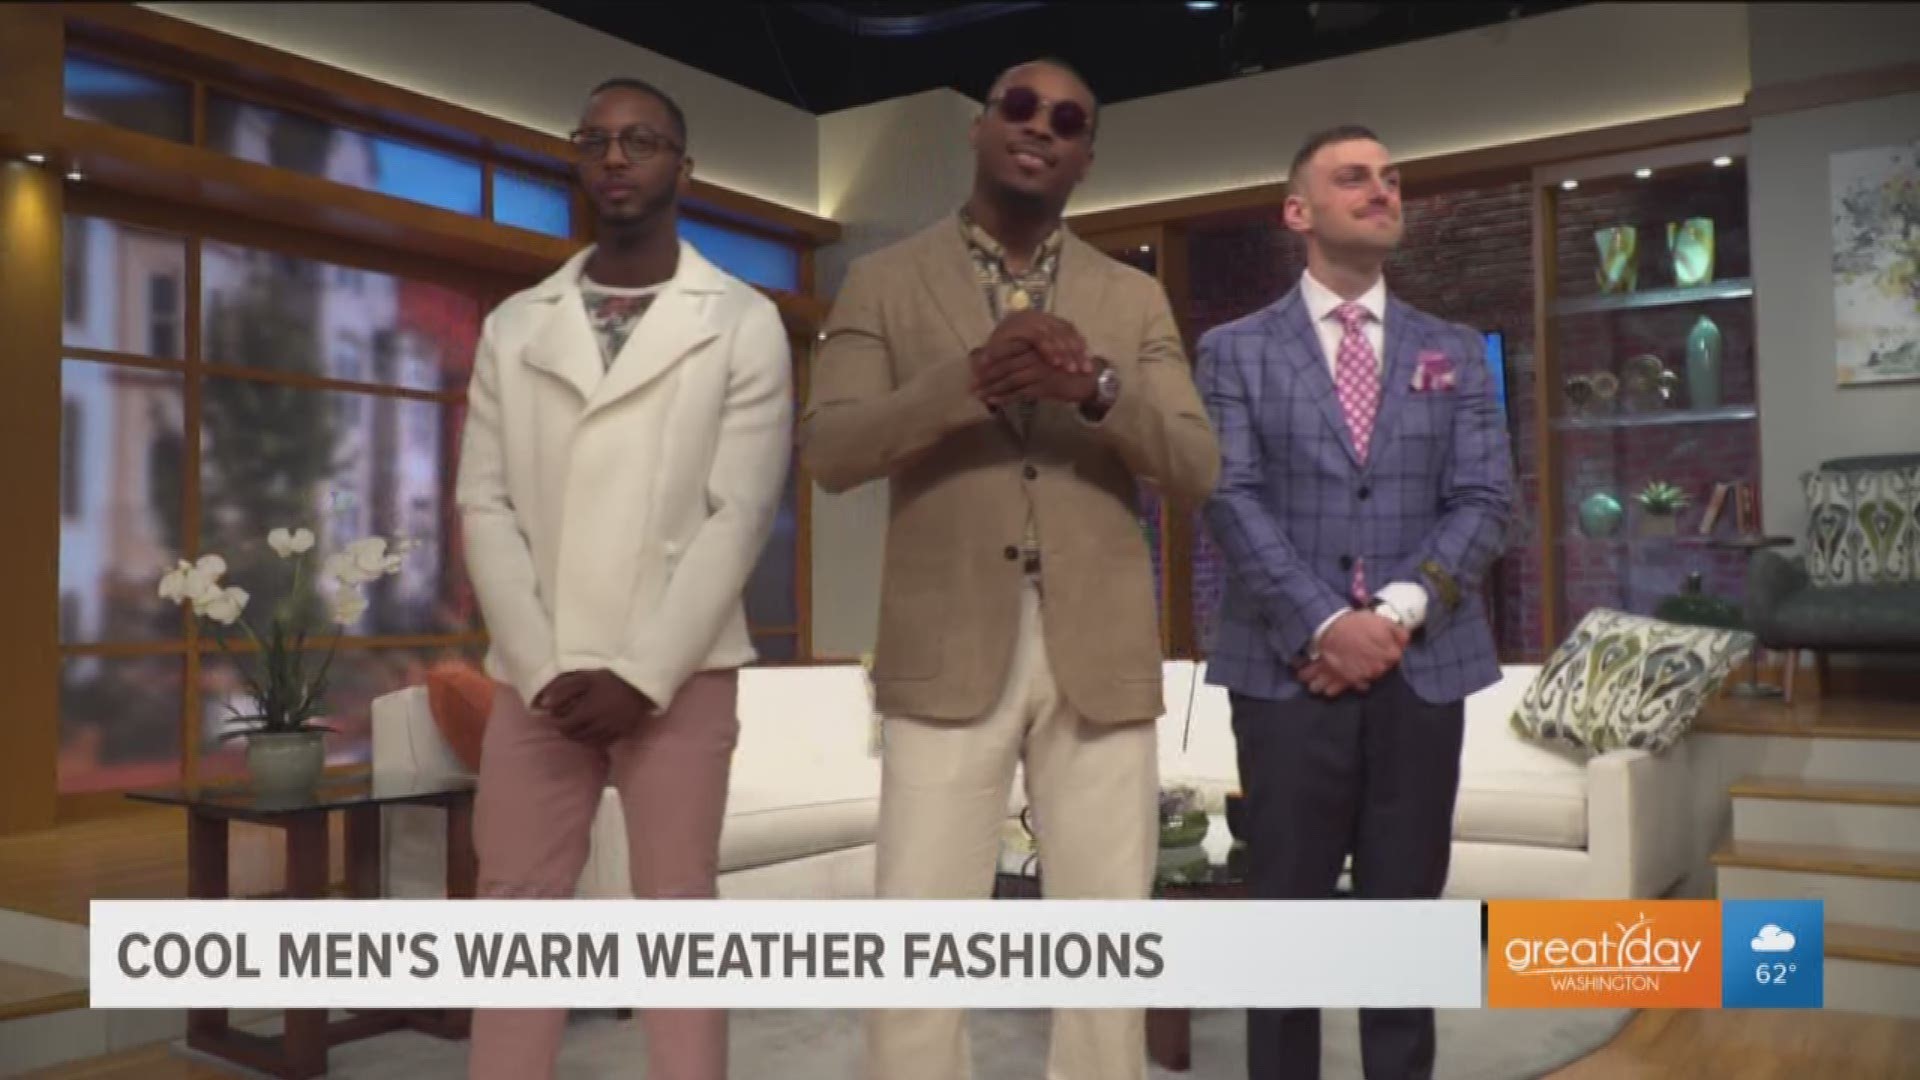 DC Fashion Fool, Barnette Holston shares the top looks for men this summer from head to toe.